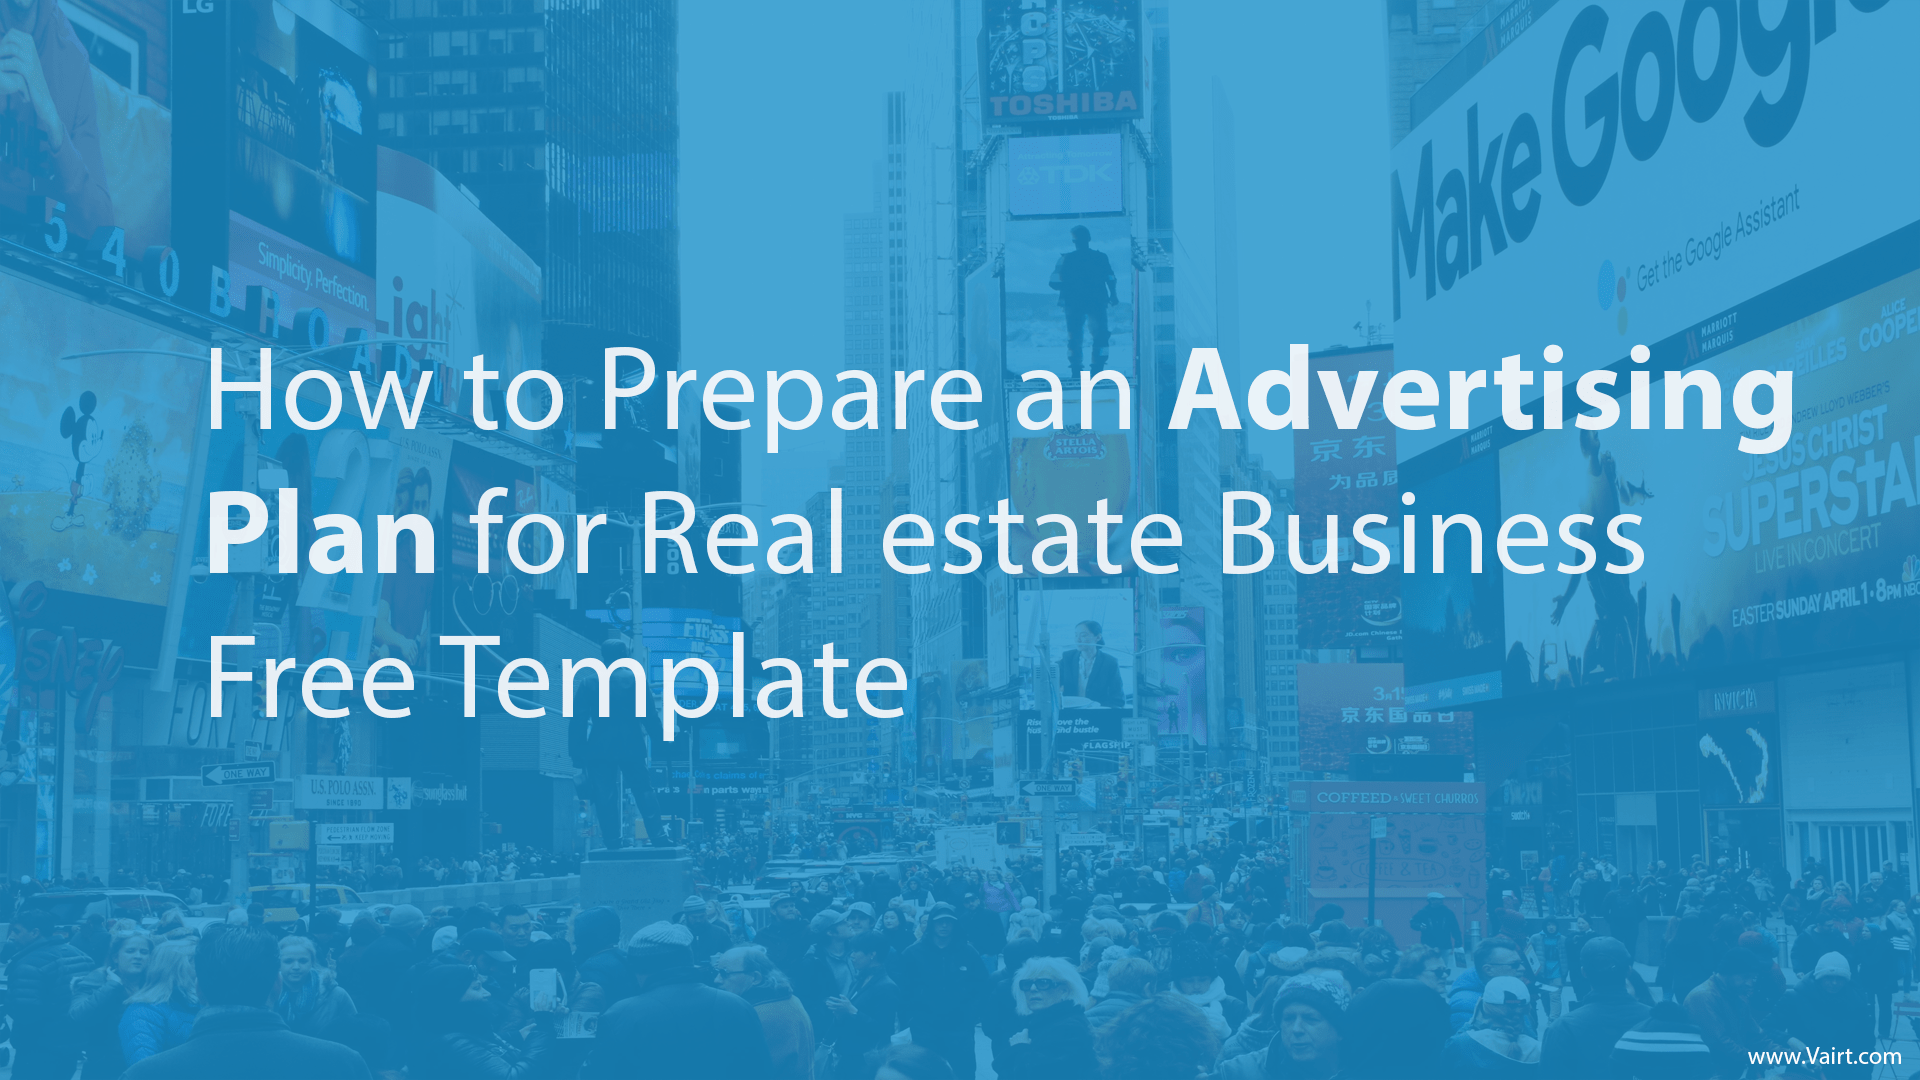 Advertising Plan for Real Estate Business